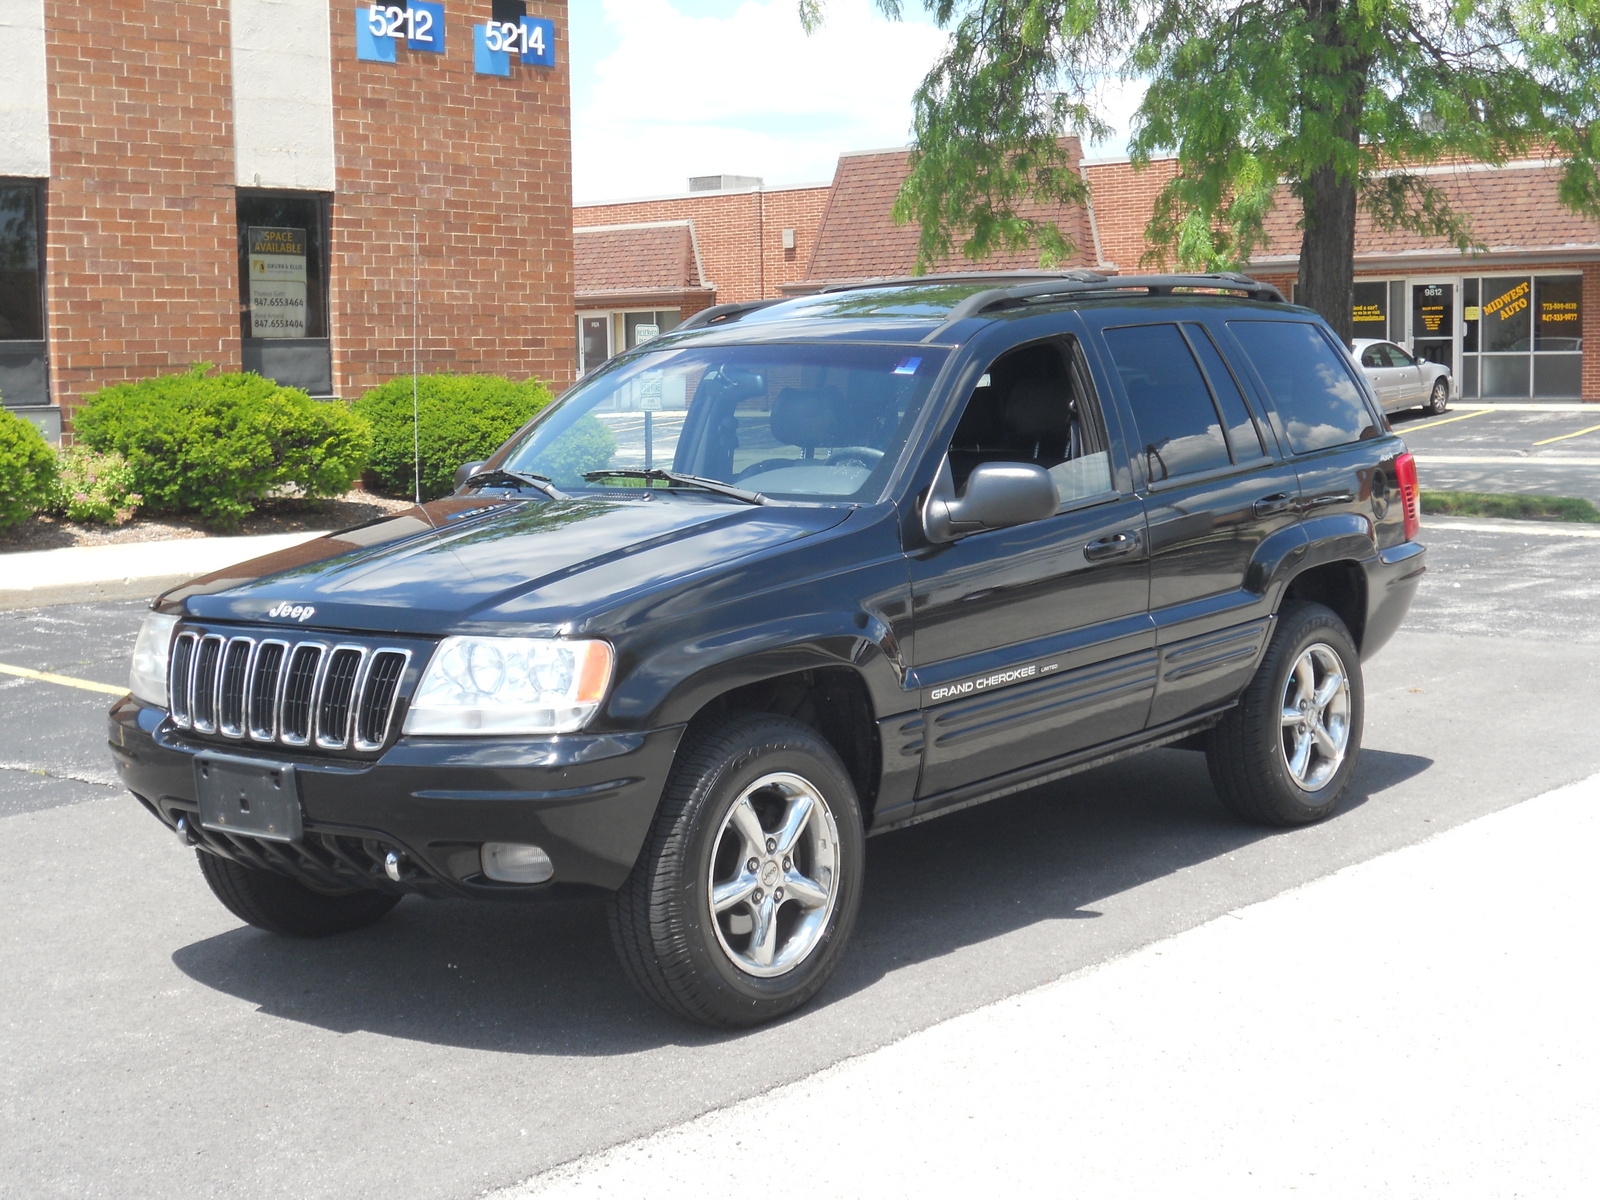 2001 Jeep grand cherokee limited 4wd reviews #4